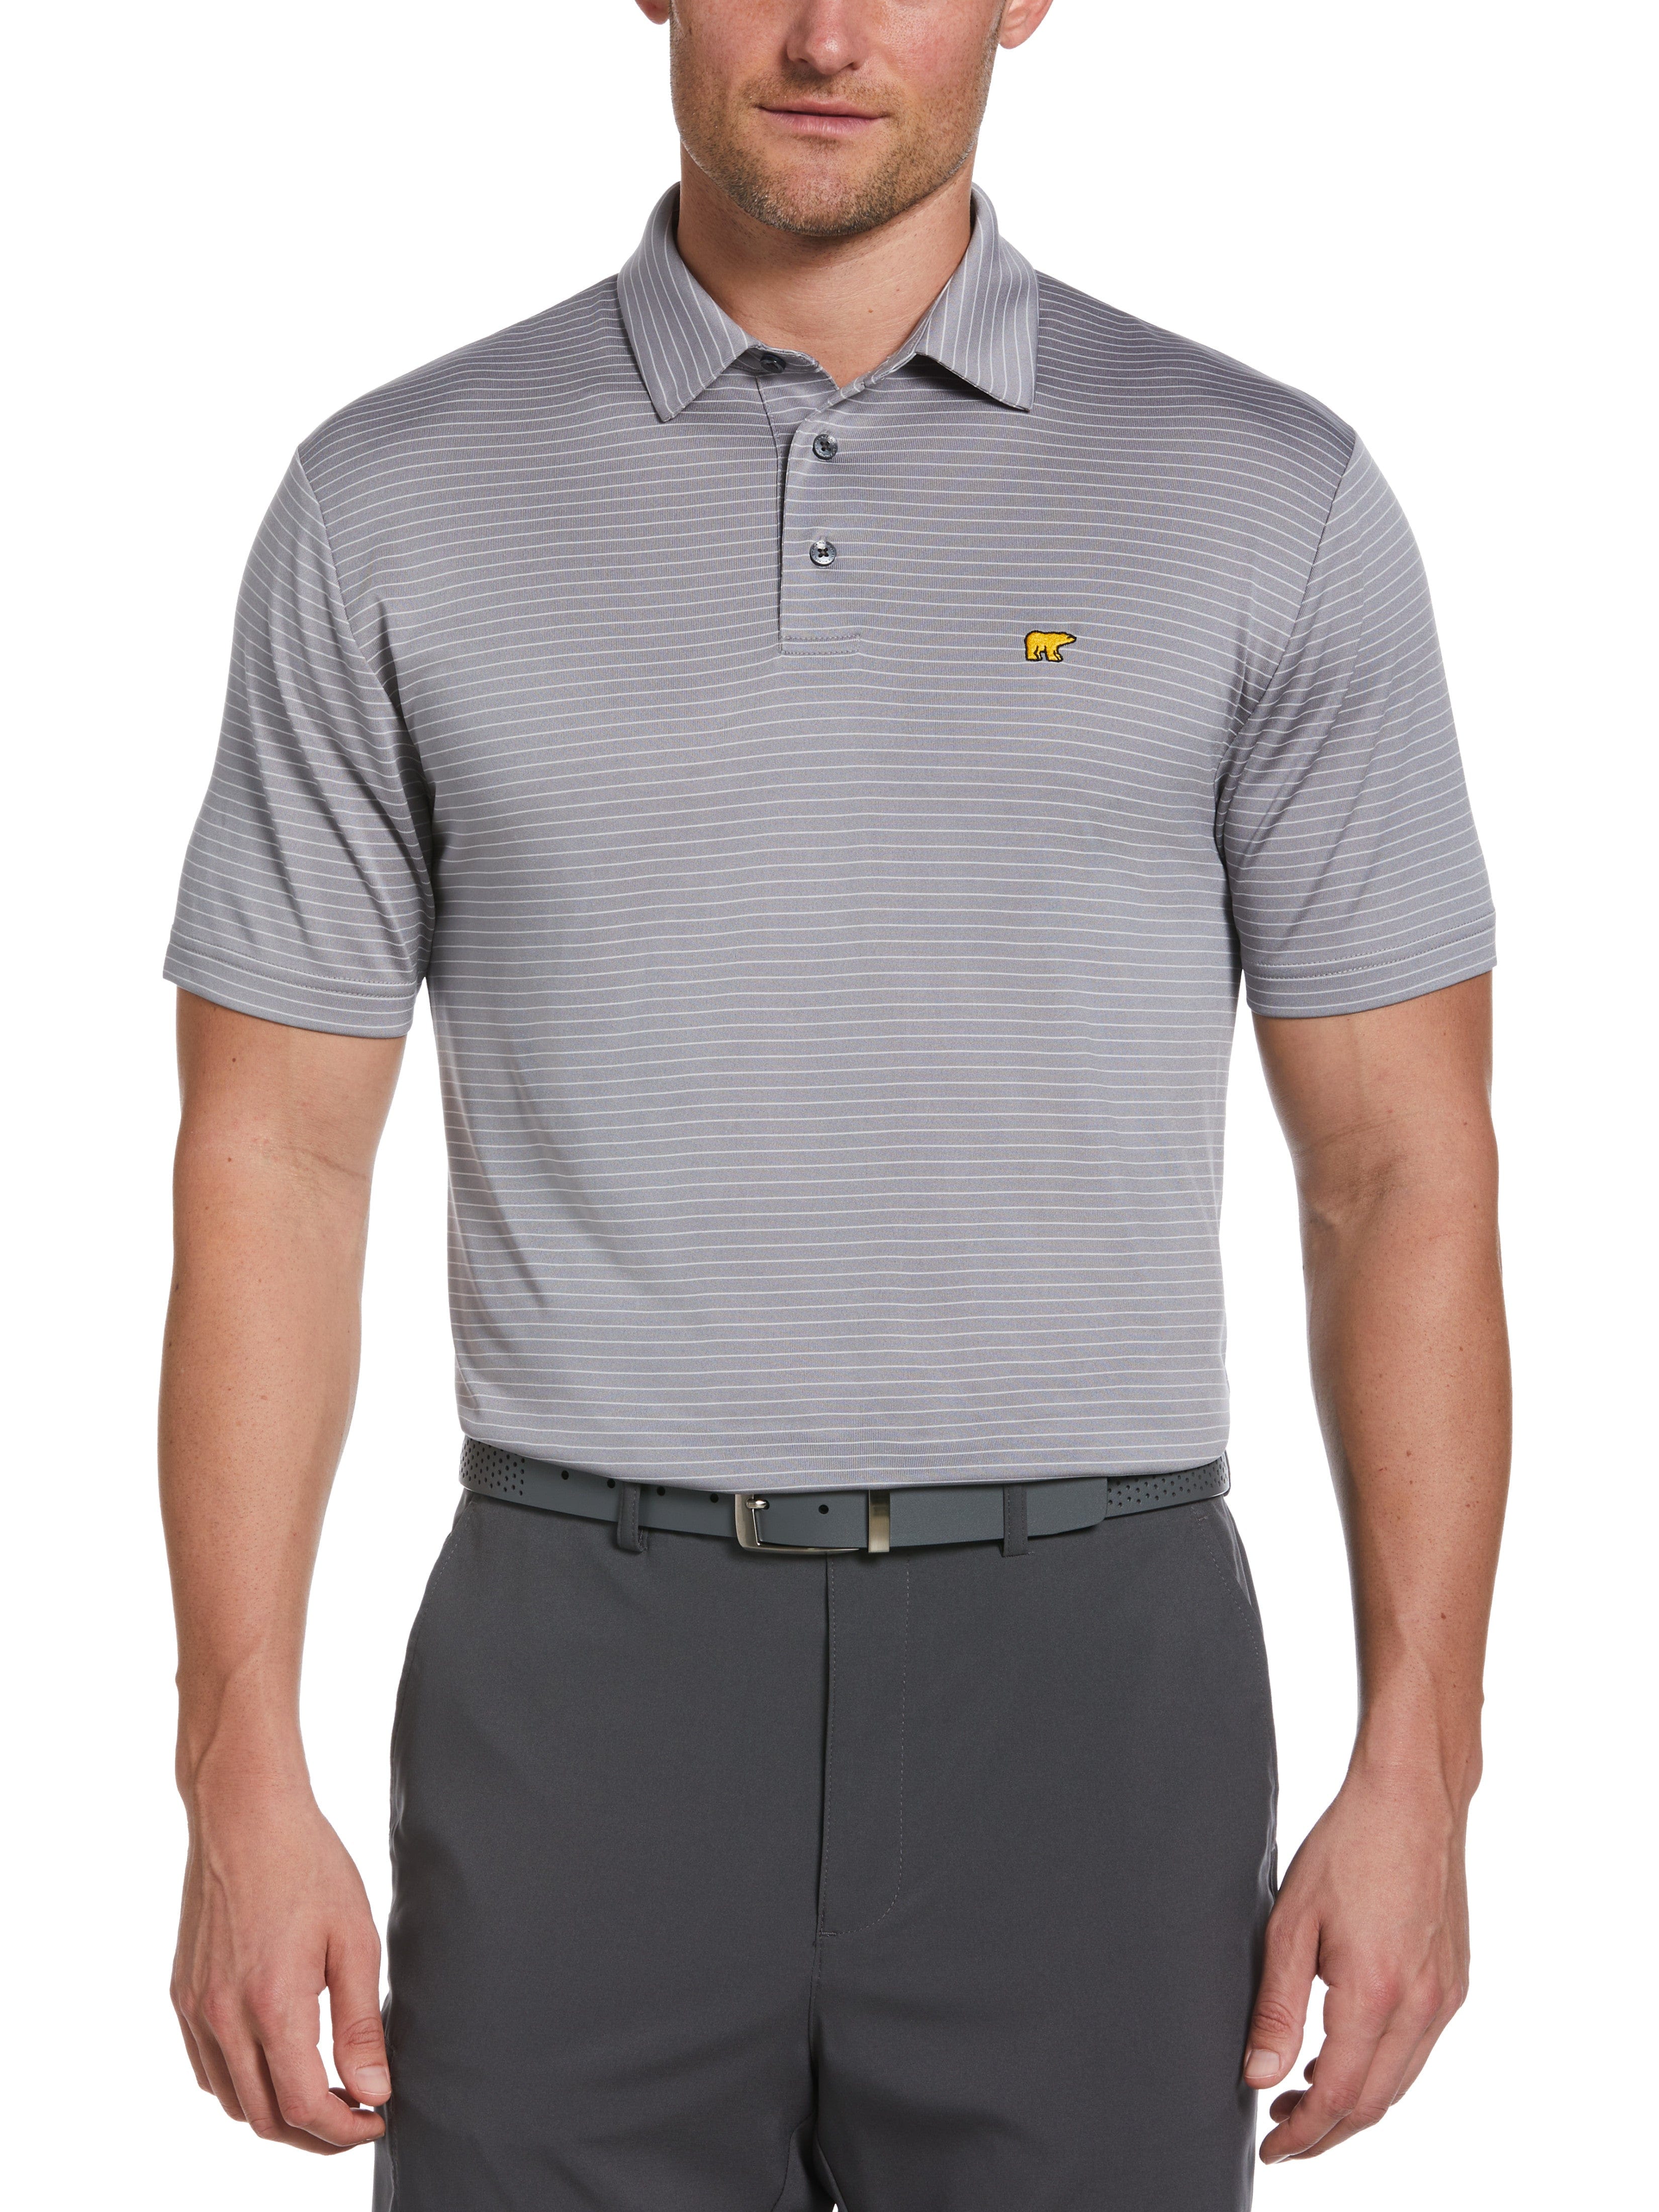 Jack Nicklaus Mens Two Color Stripe Golf Polo Shirt, Size Medium, Tradewinds Gray, 100% Polyester | Golf Apparel Shop